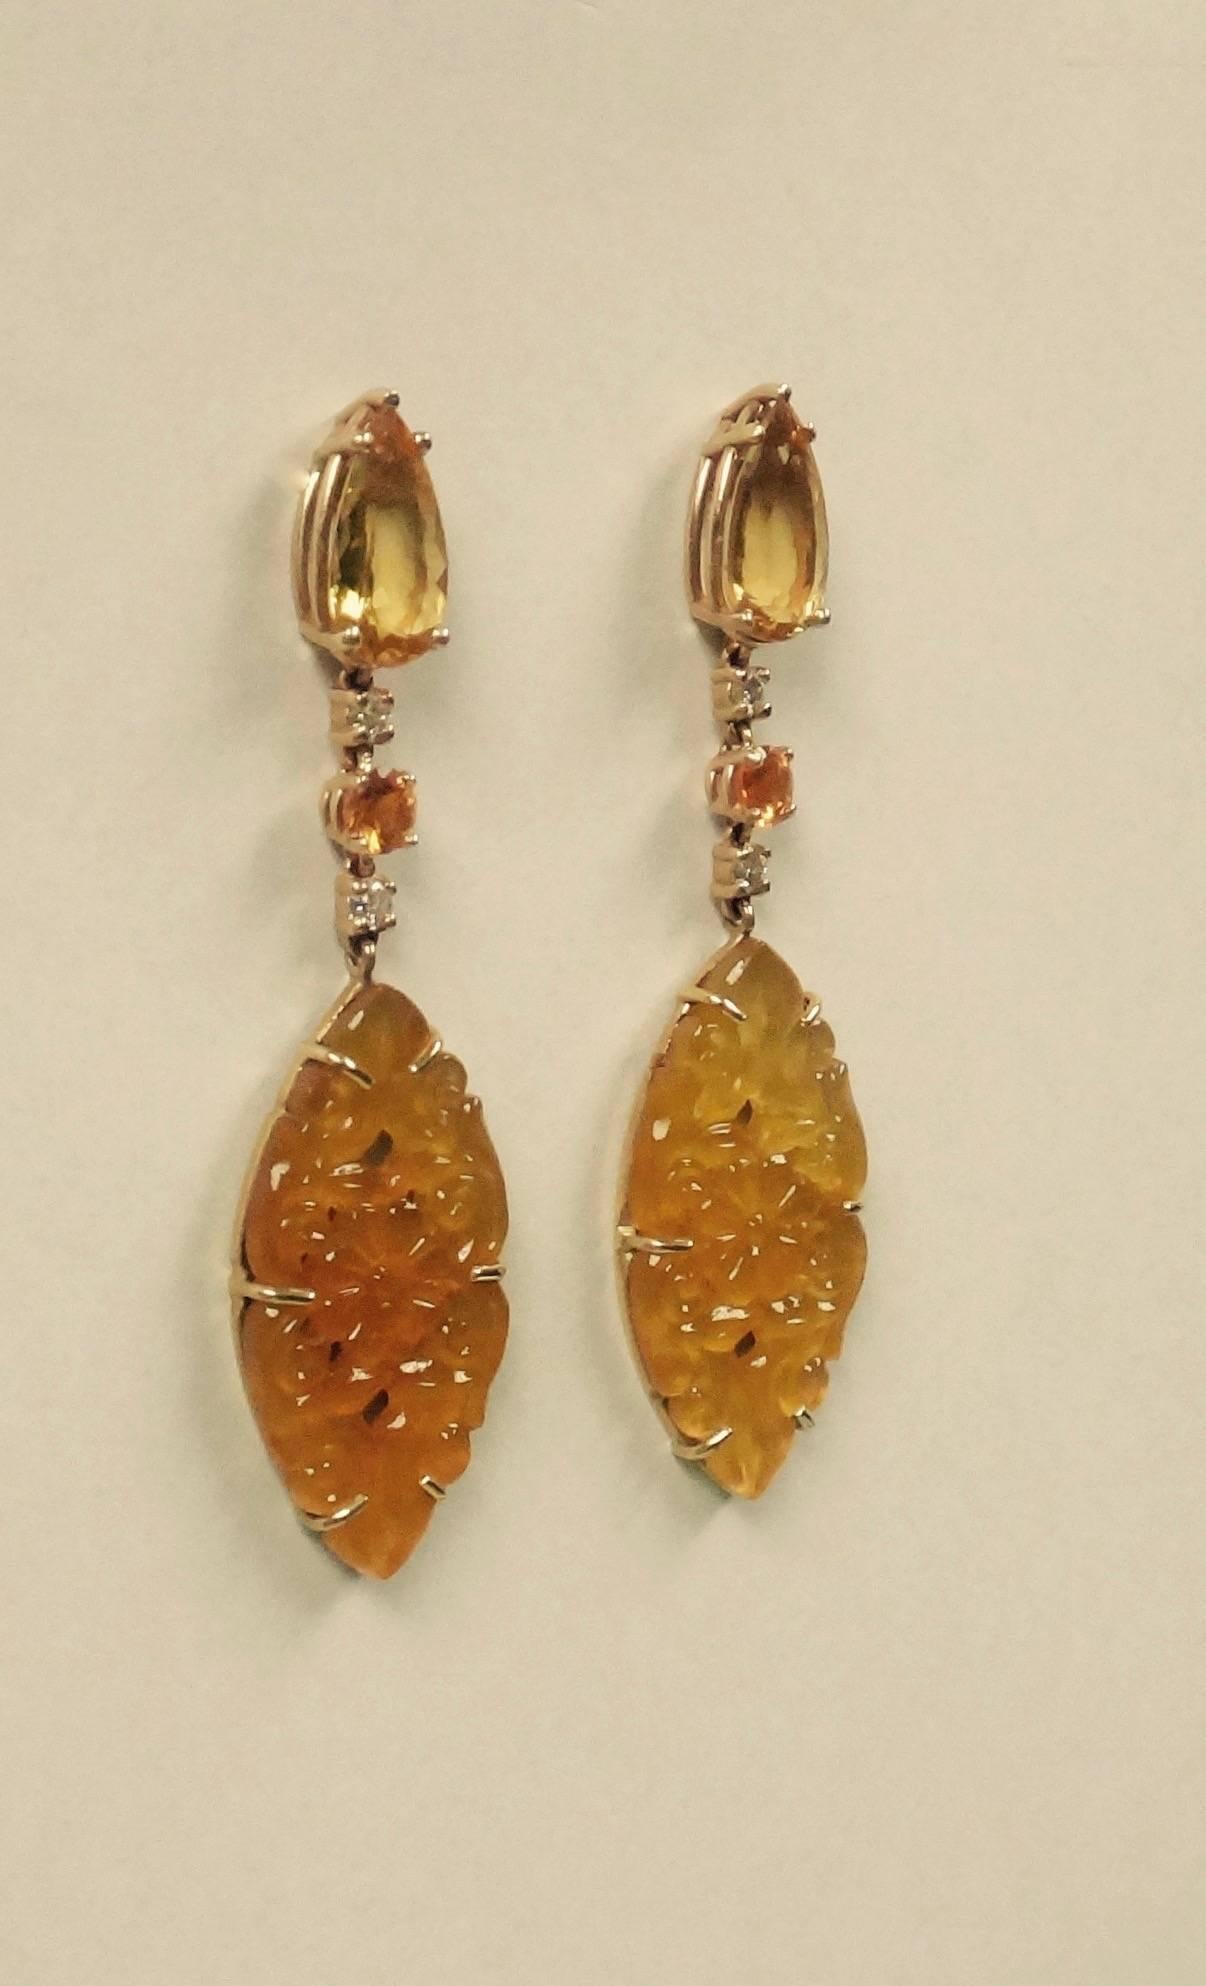 One-of-a-kind dangle earrings consisting of pear shaped golden beryls, brilliant cut diamonds, yellow sapphires and exceptionally carved yellow onyx navettes.  All set in 18k yellow gold.  The navettes have been backed in 24k yellow gold to further